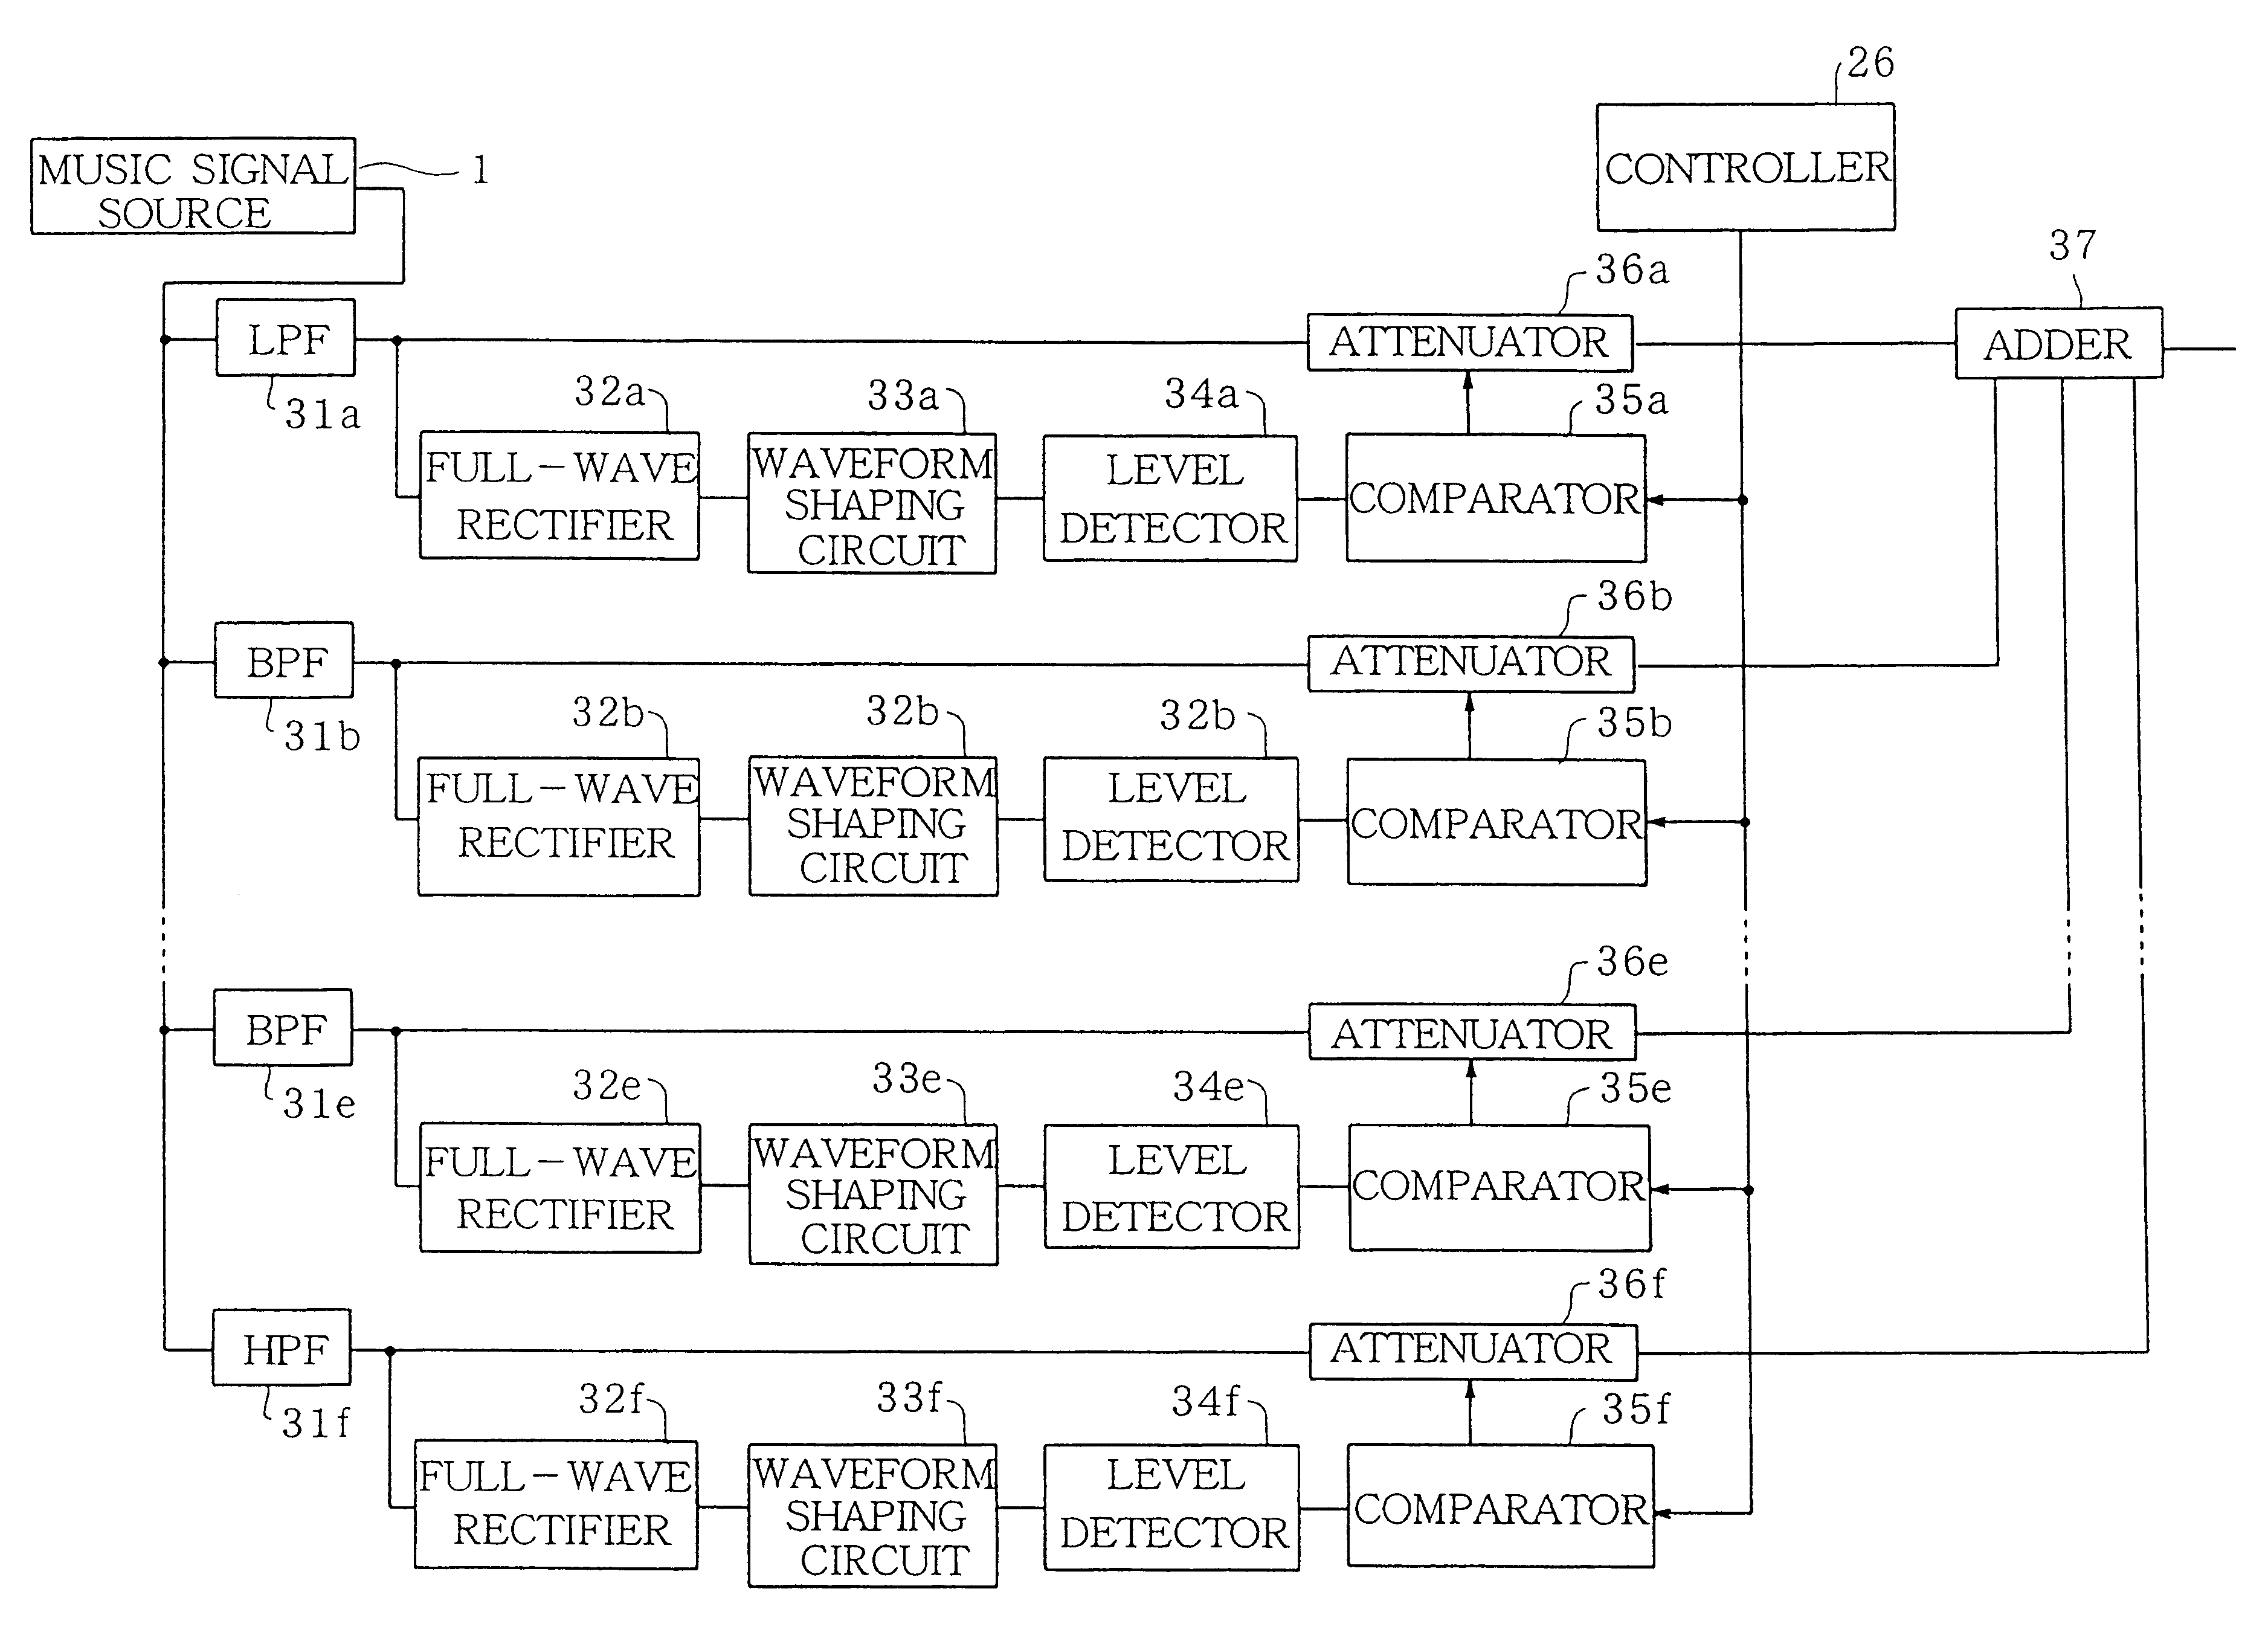 Noise reduction system for an audio system